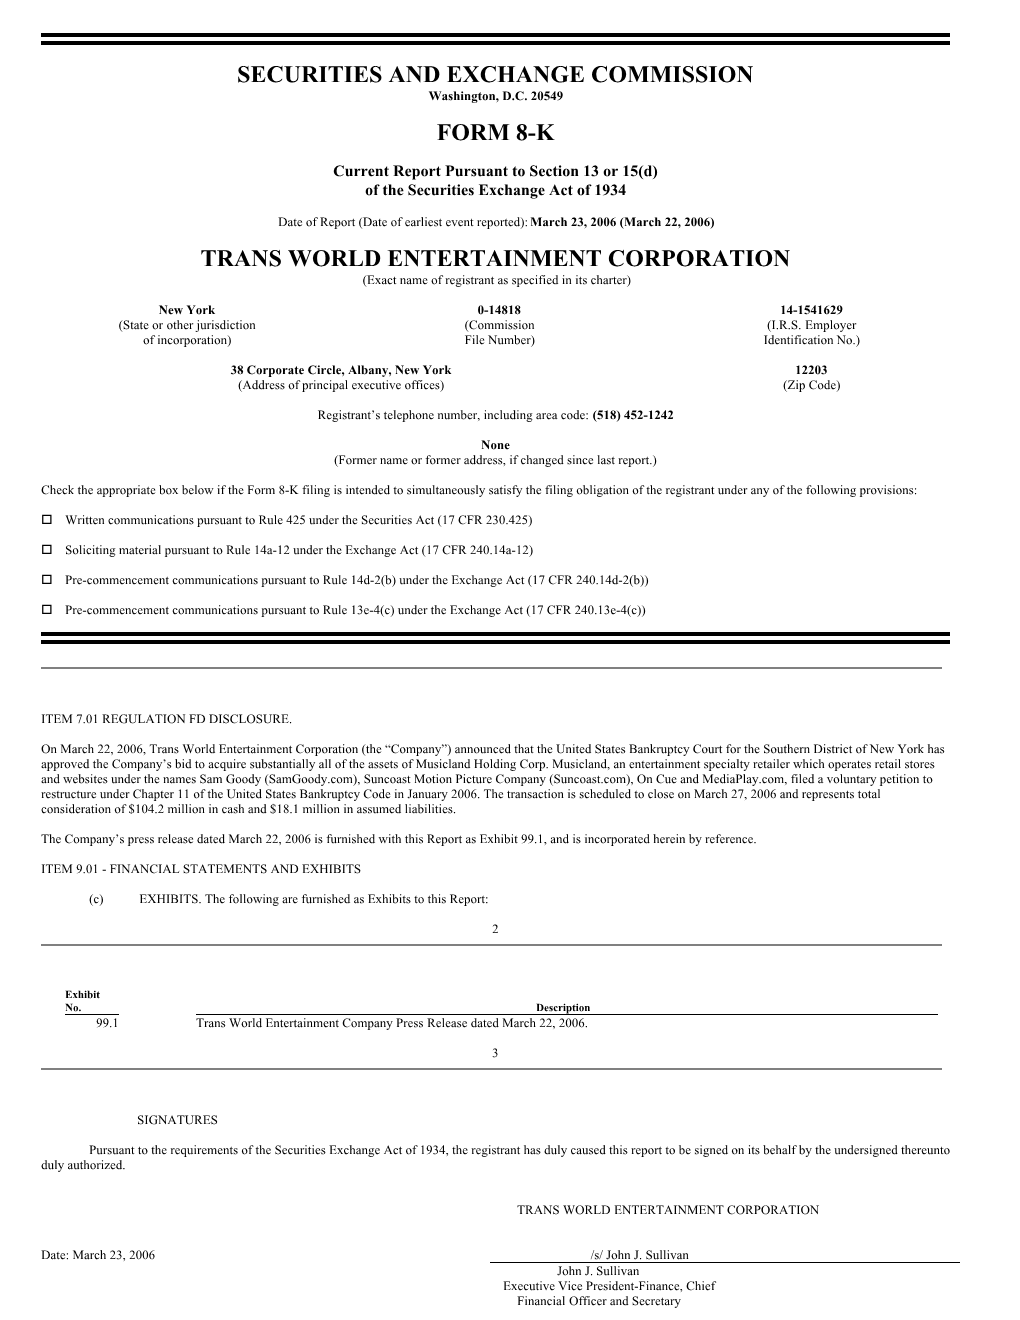 Securities and Exchange Commission Form 8-K Trans